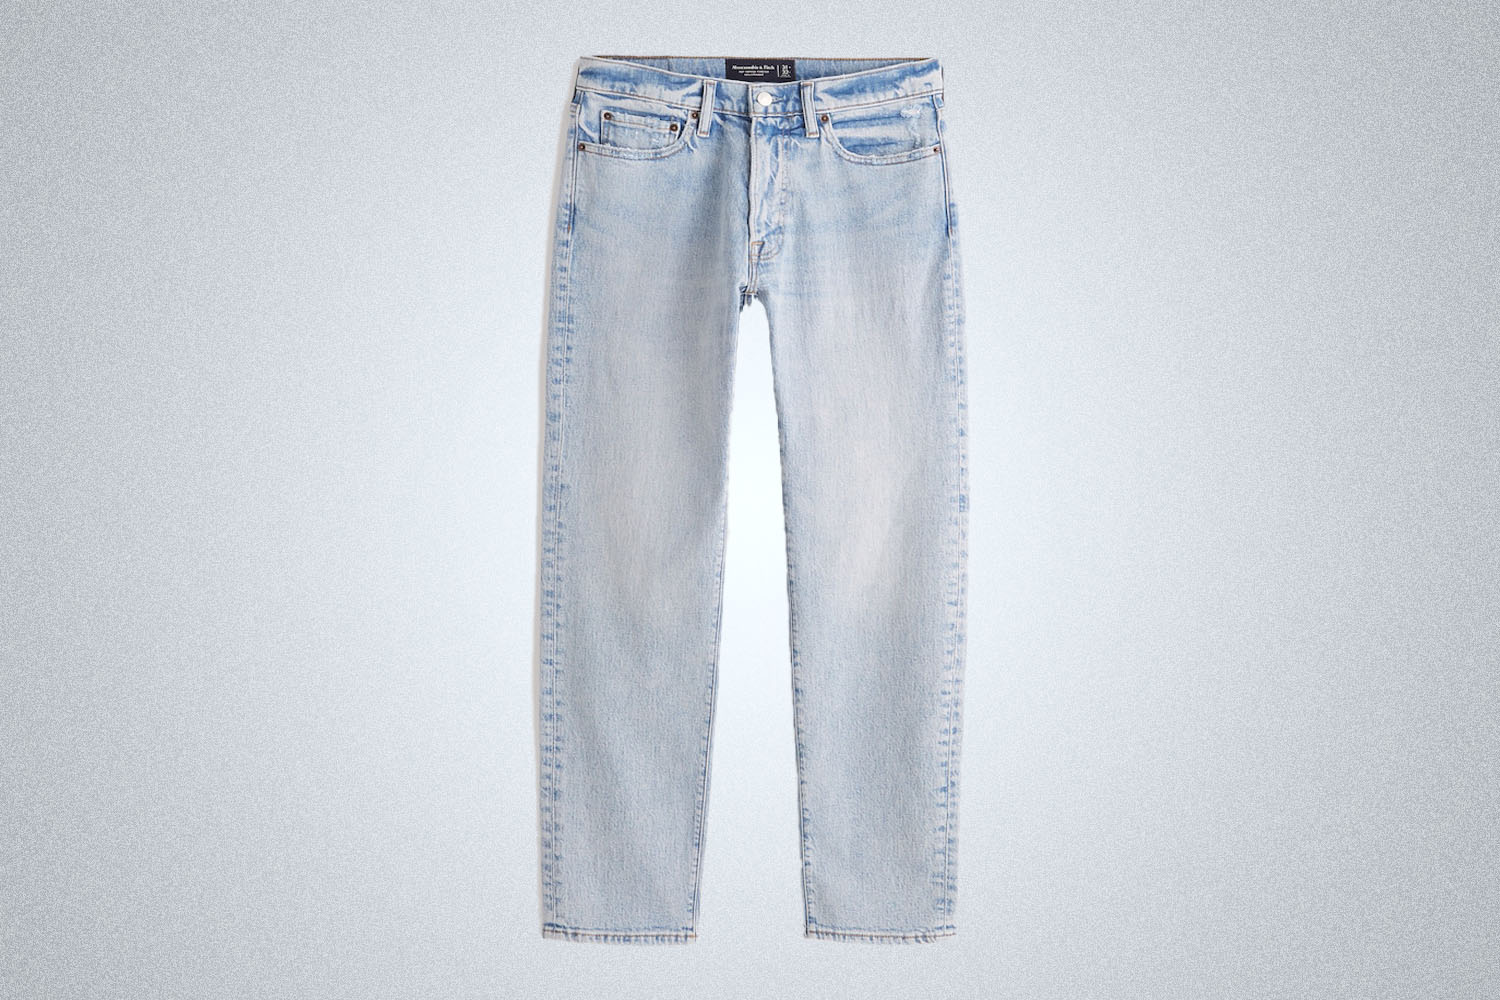 a pair of lightwash jeans from Abercrombie on a grey background